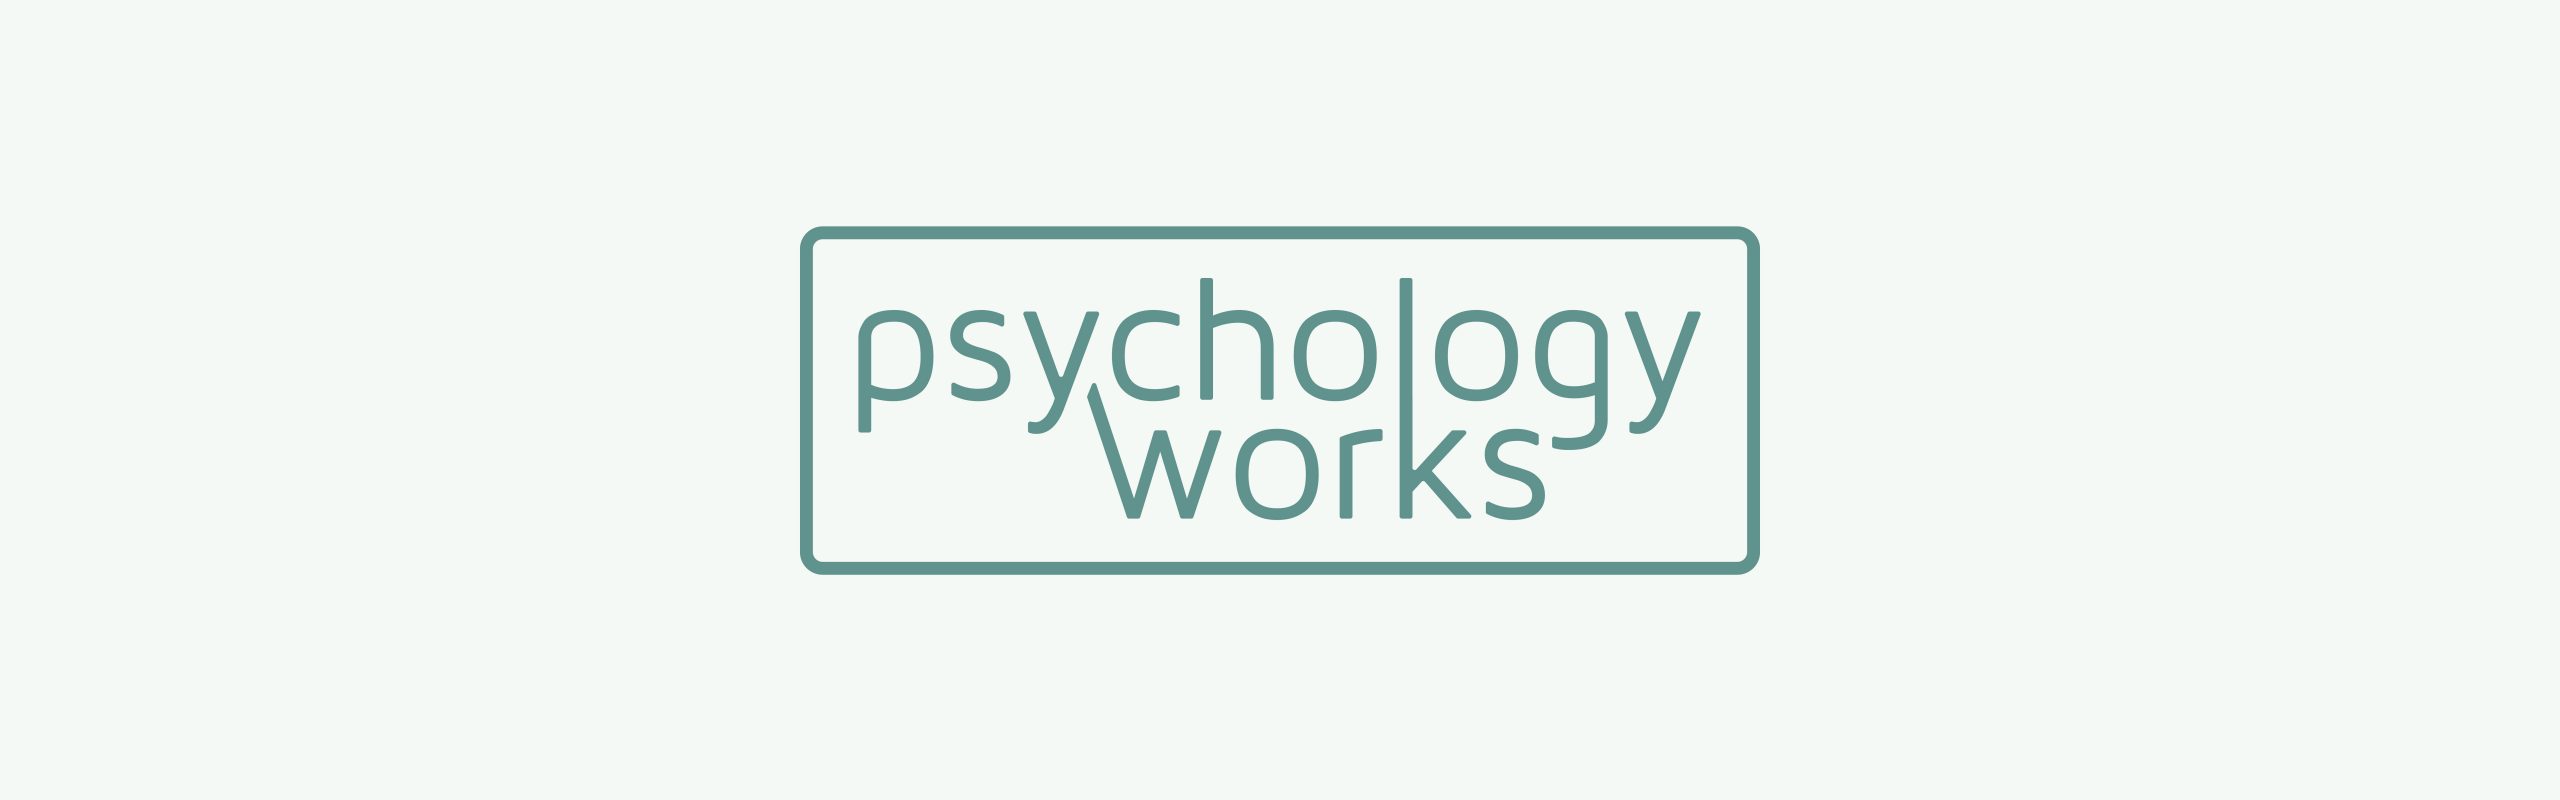 The image displays a minimalist logo with the text "psychology works" centered in a rectangular frame on a plain background.